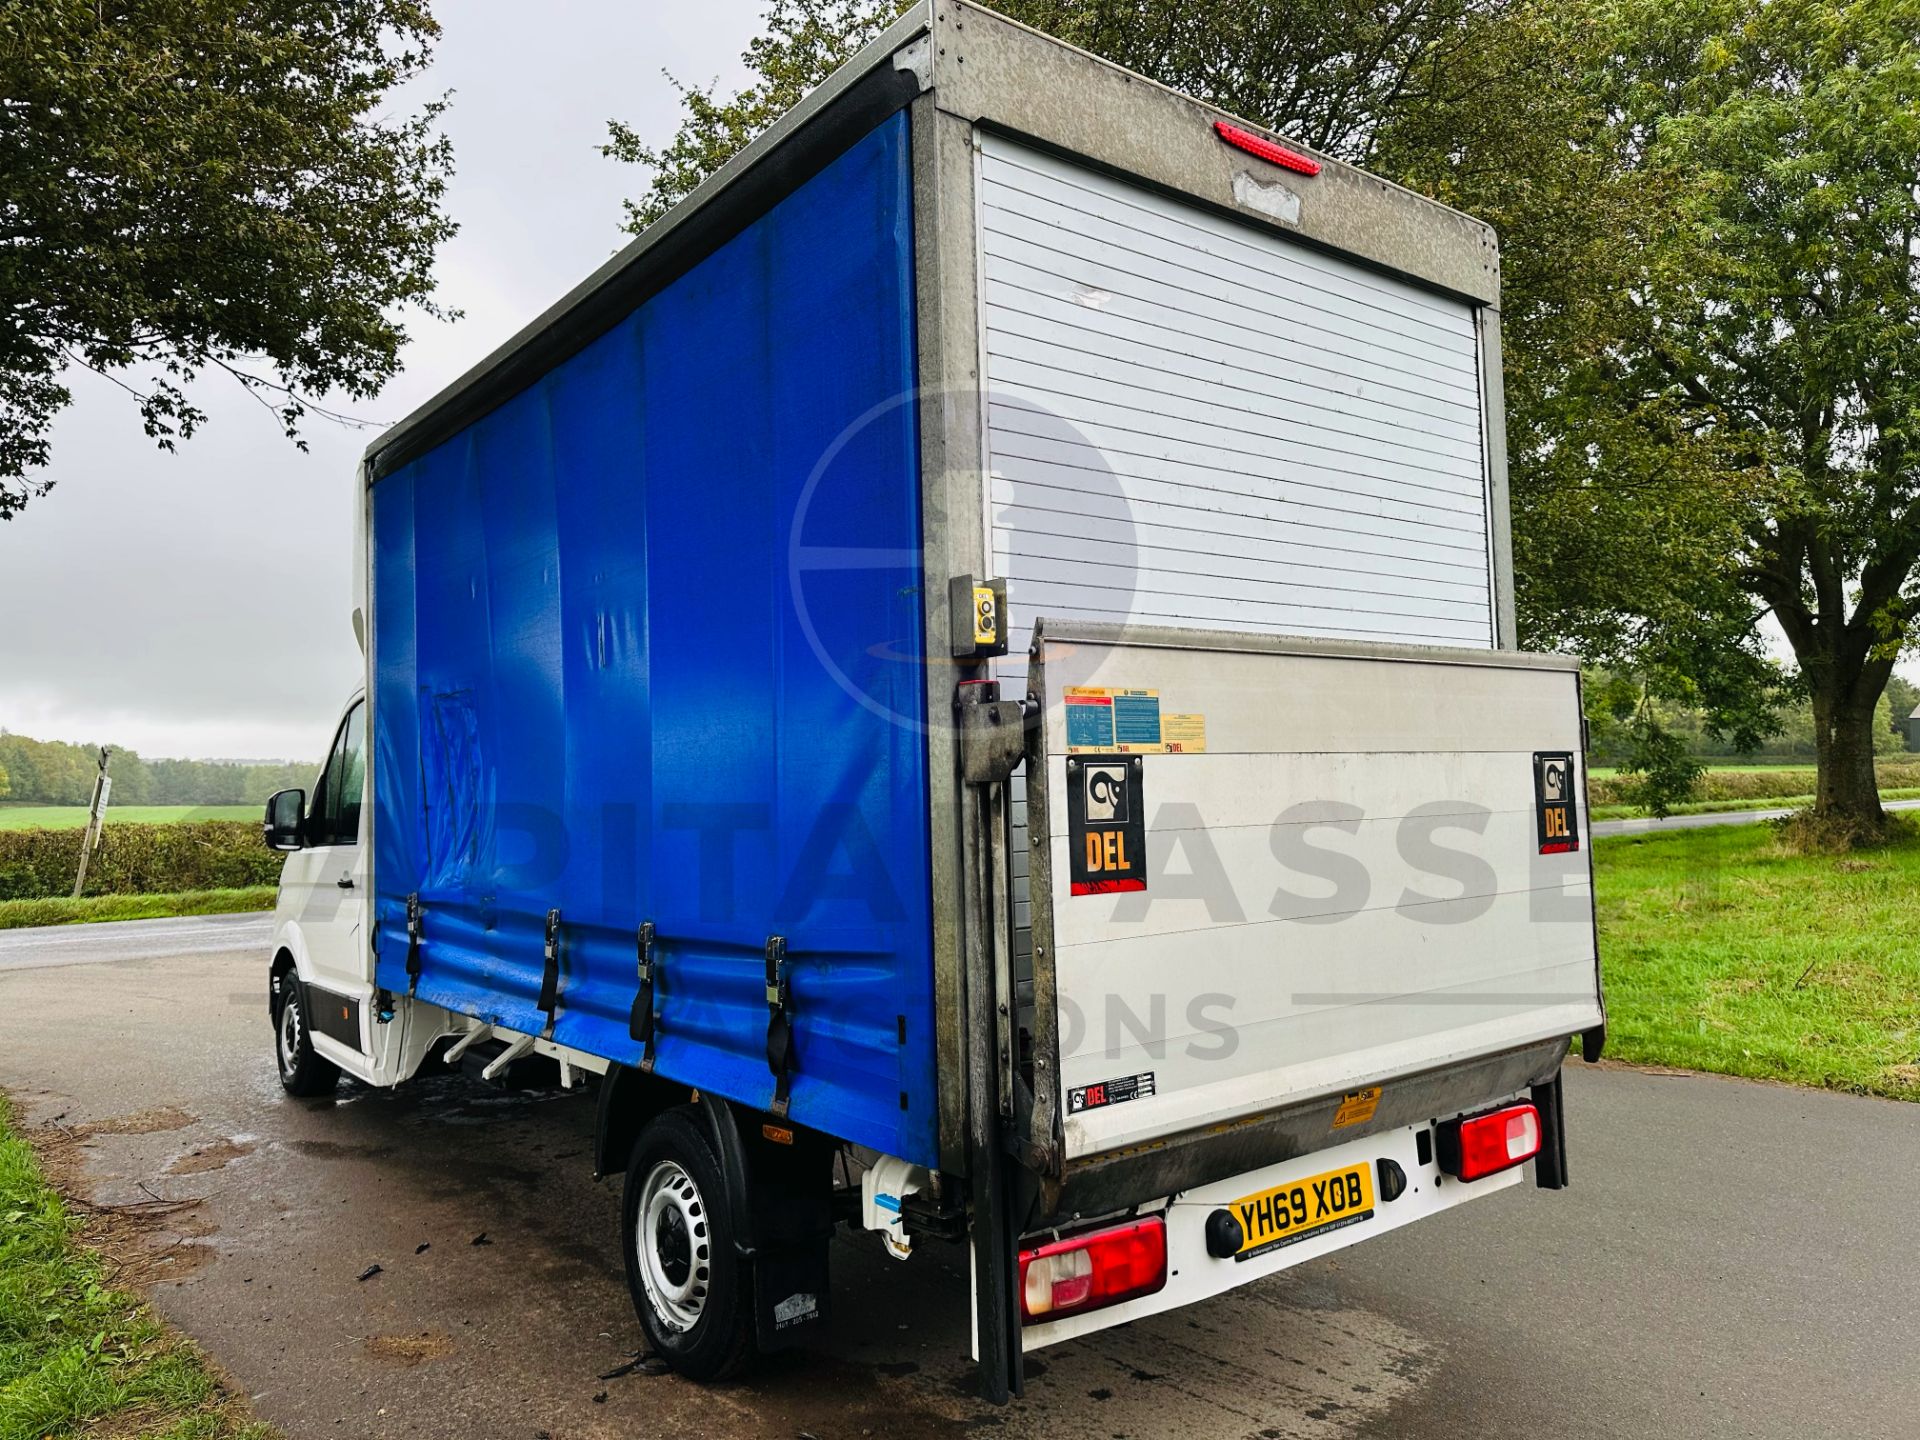 (On Sale) VOLKSWAGEN CRAFTER CR35 *LWB - CURTAIN SIDE* (69 REG - EURO 6) 2.0 TDI *EURO 6* (1 OWNER) - Image 8 of 26